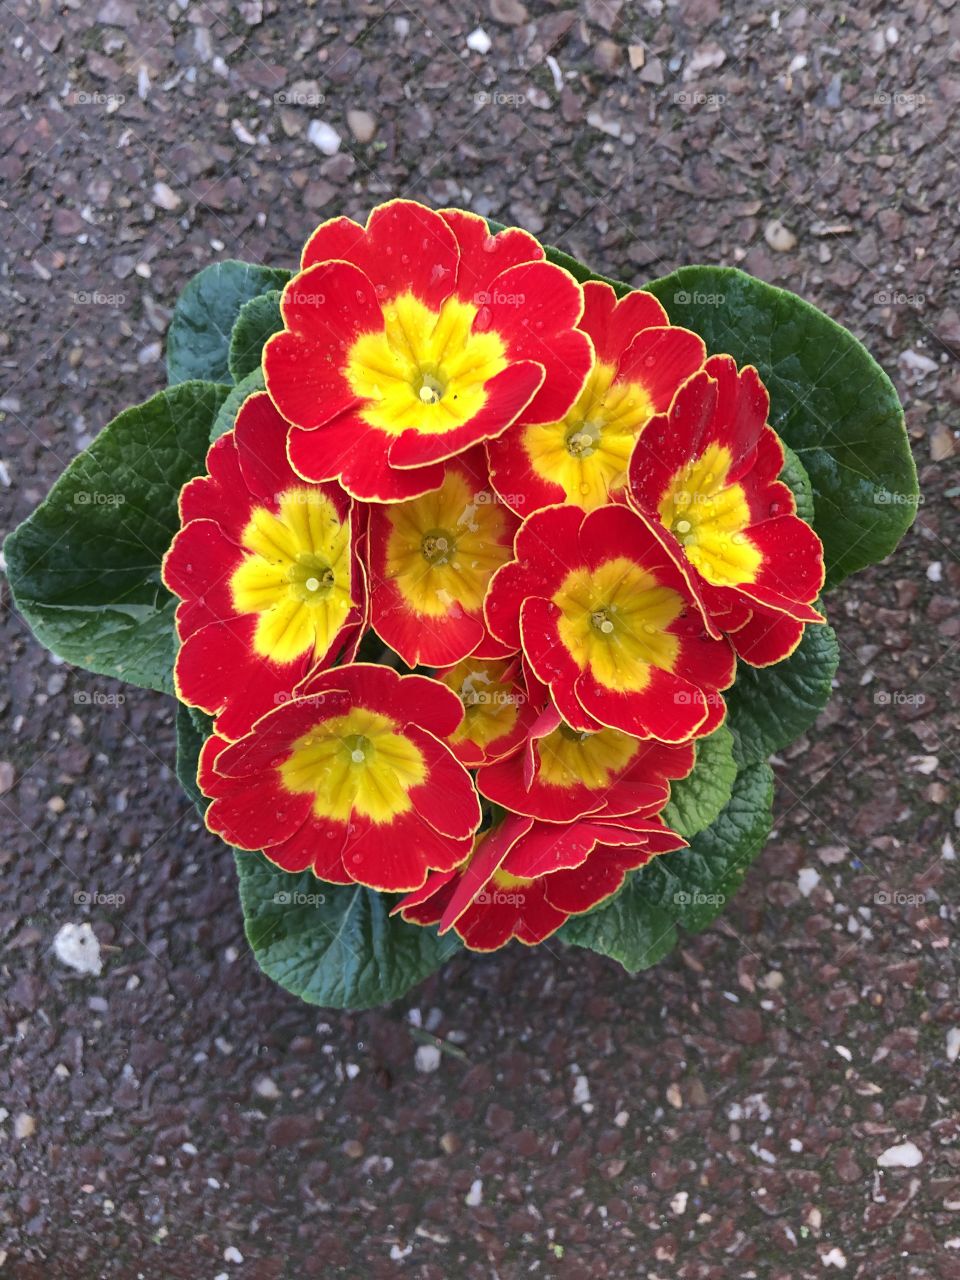 The second of two very lovely primula. The condition of these types of plants very, but this one and the yellow l felt are in superb condition.